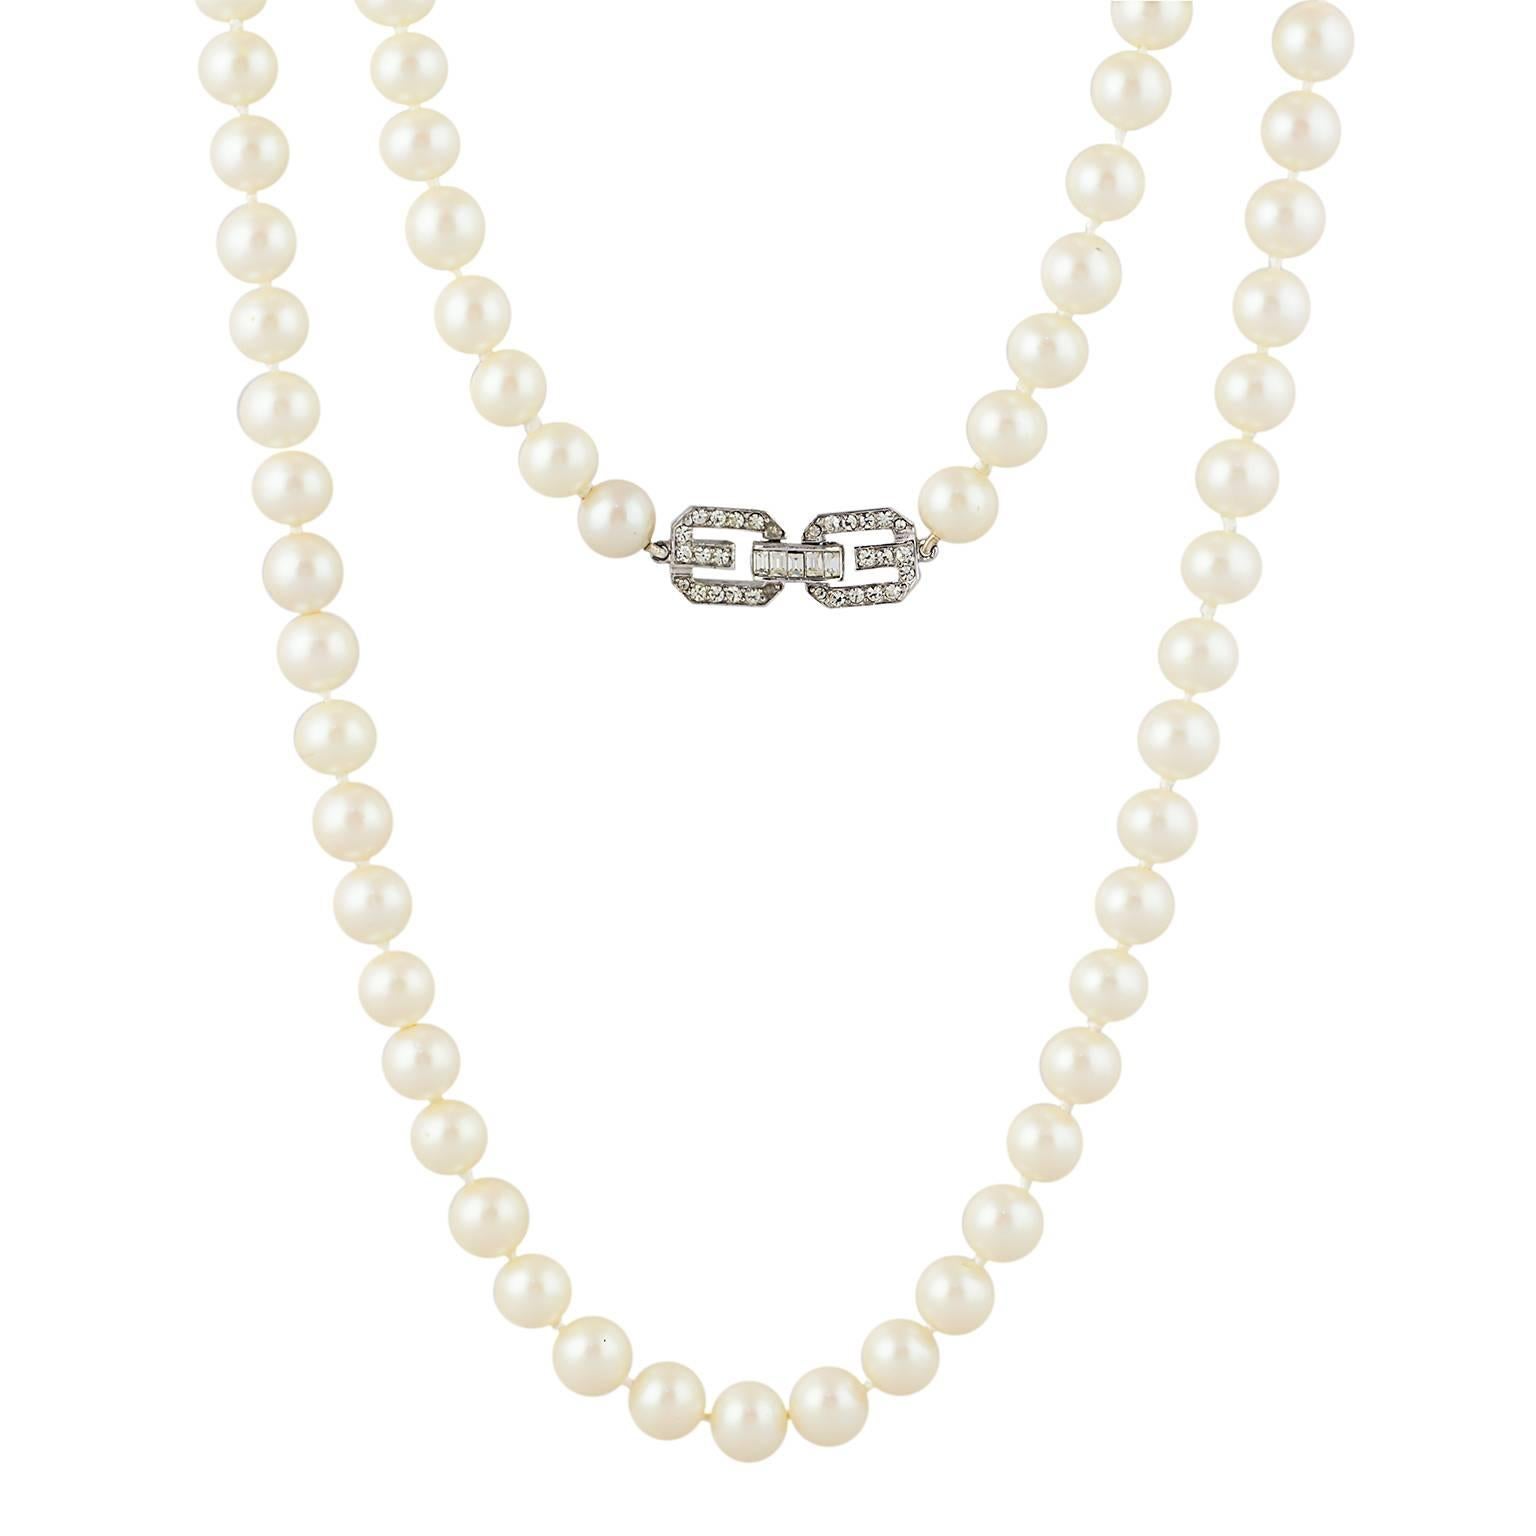 Givenchy Long Faux Pearl Crystal GG Necklace 